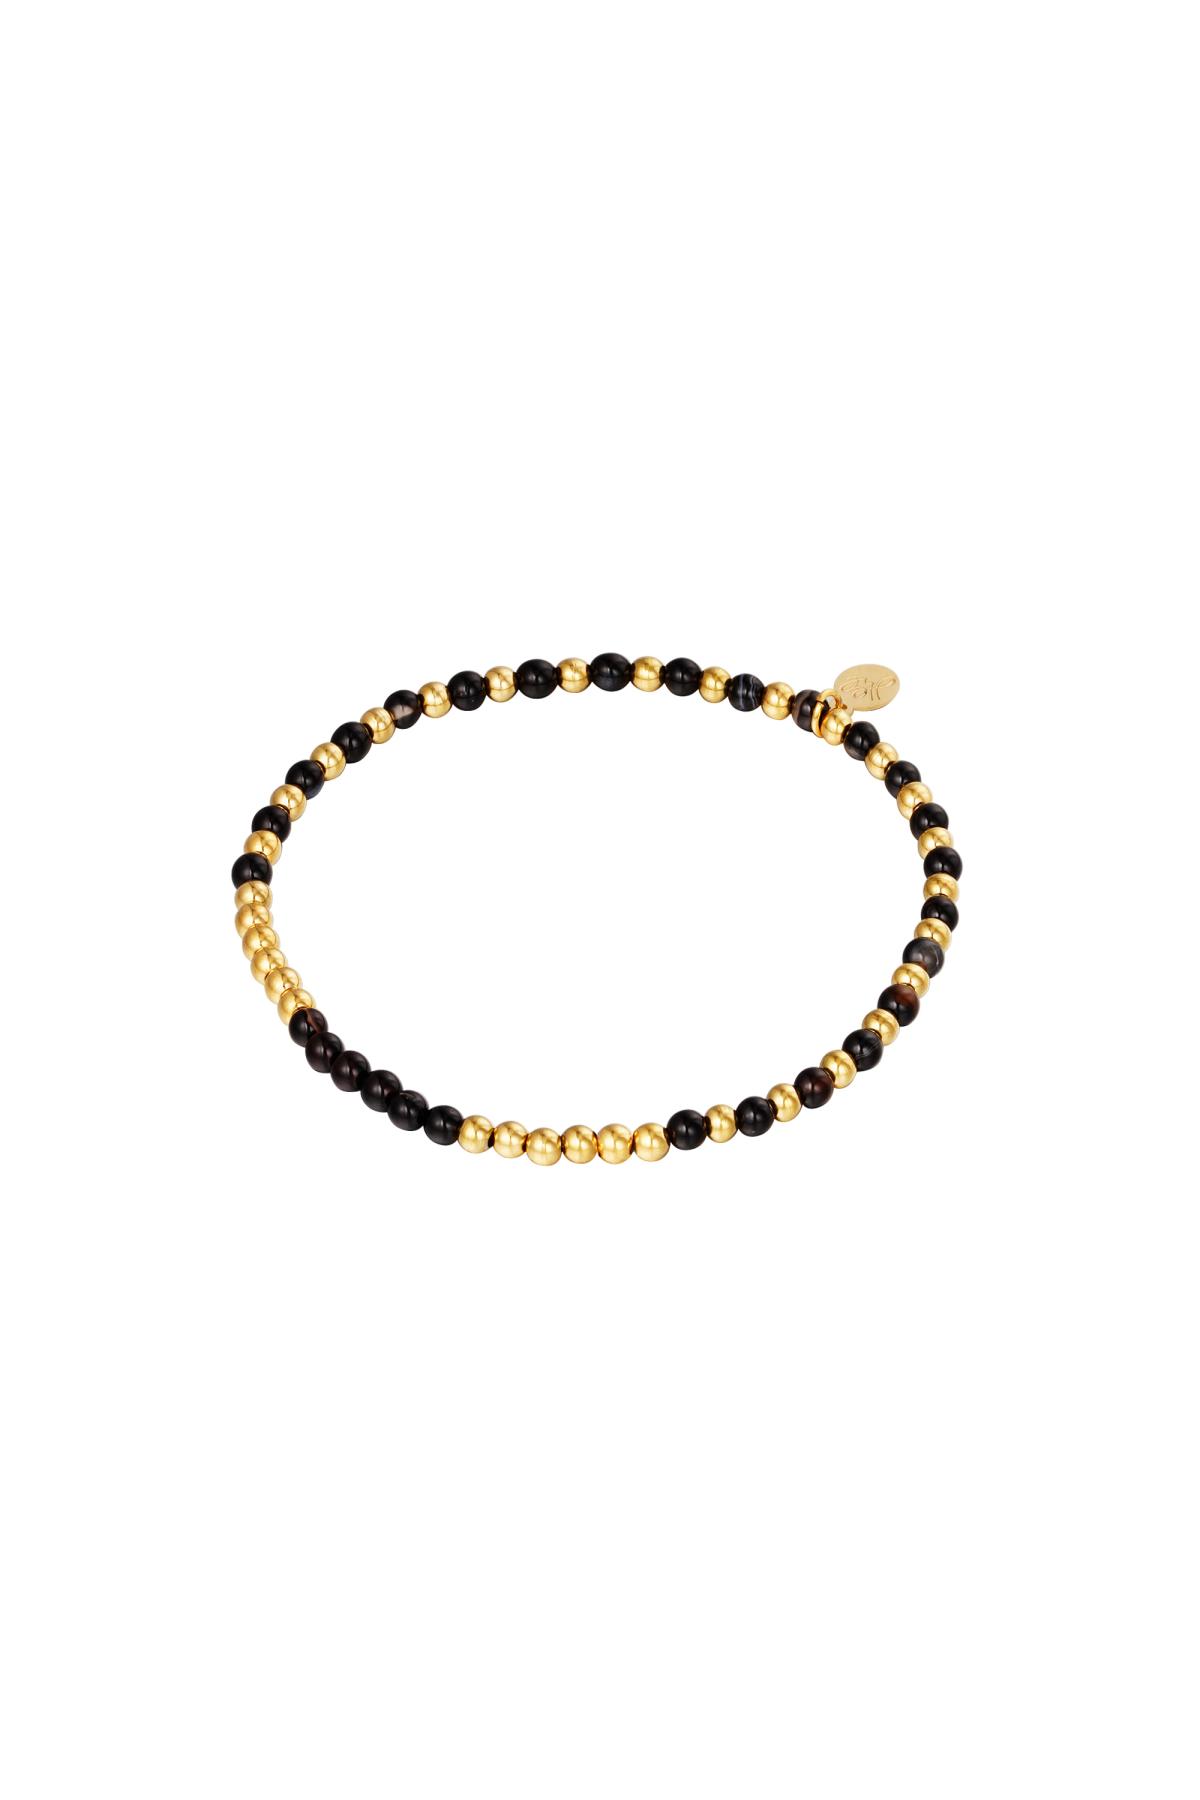 Bracciale Perline Sfere Gold Stainless Steel